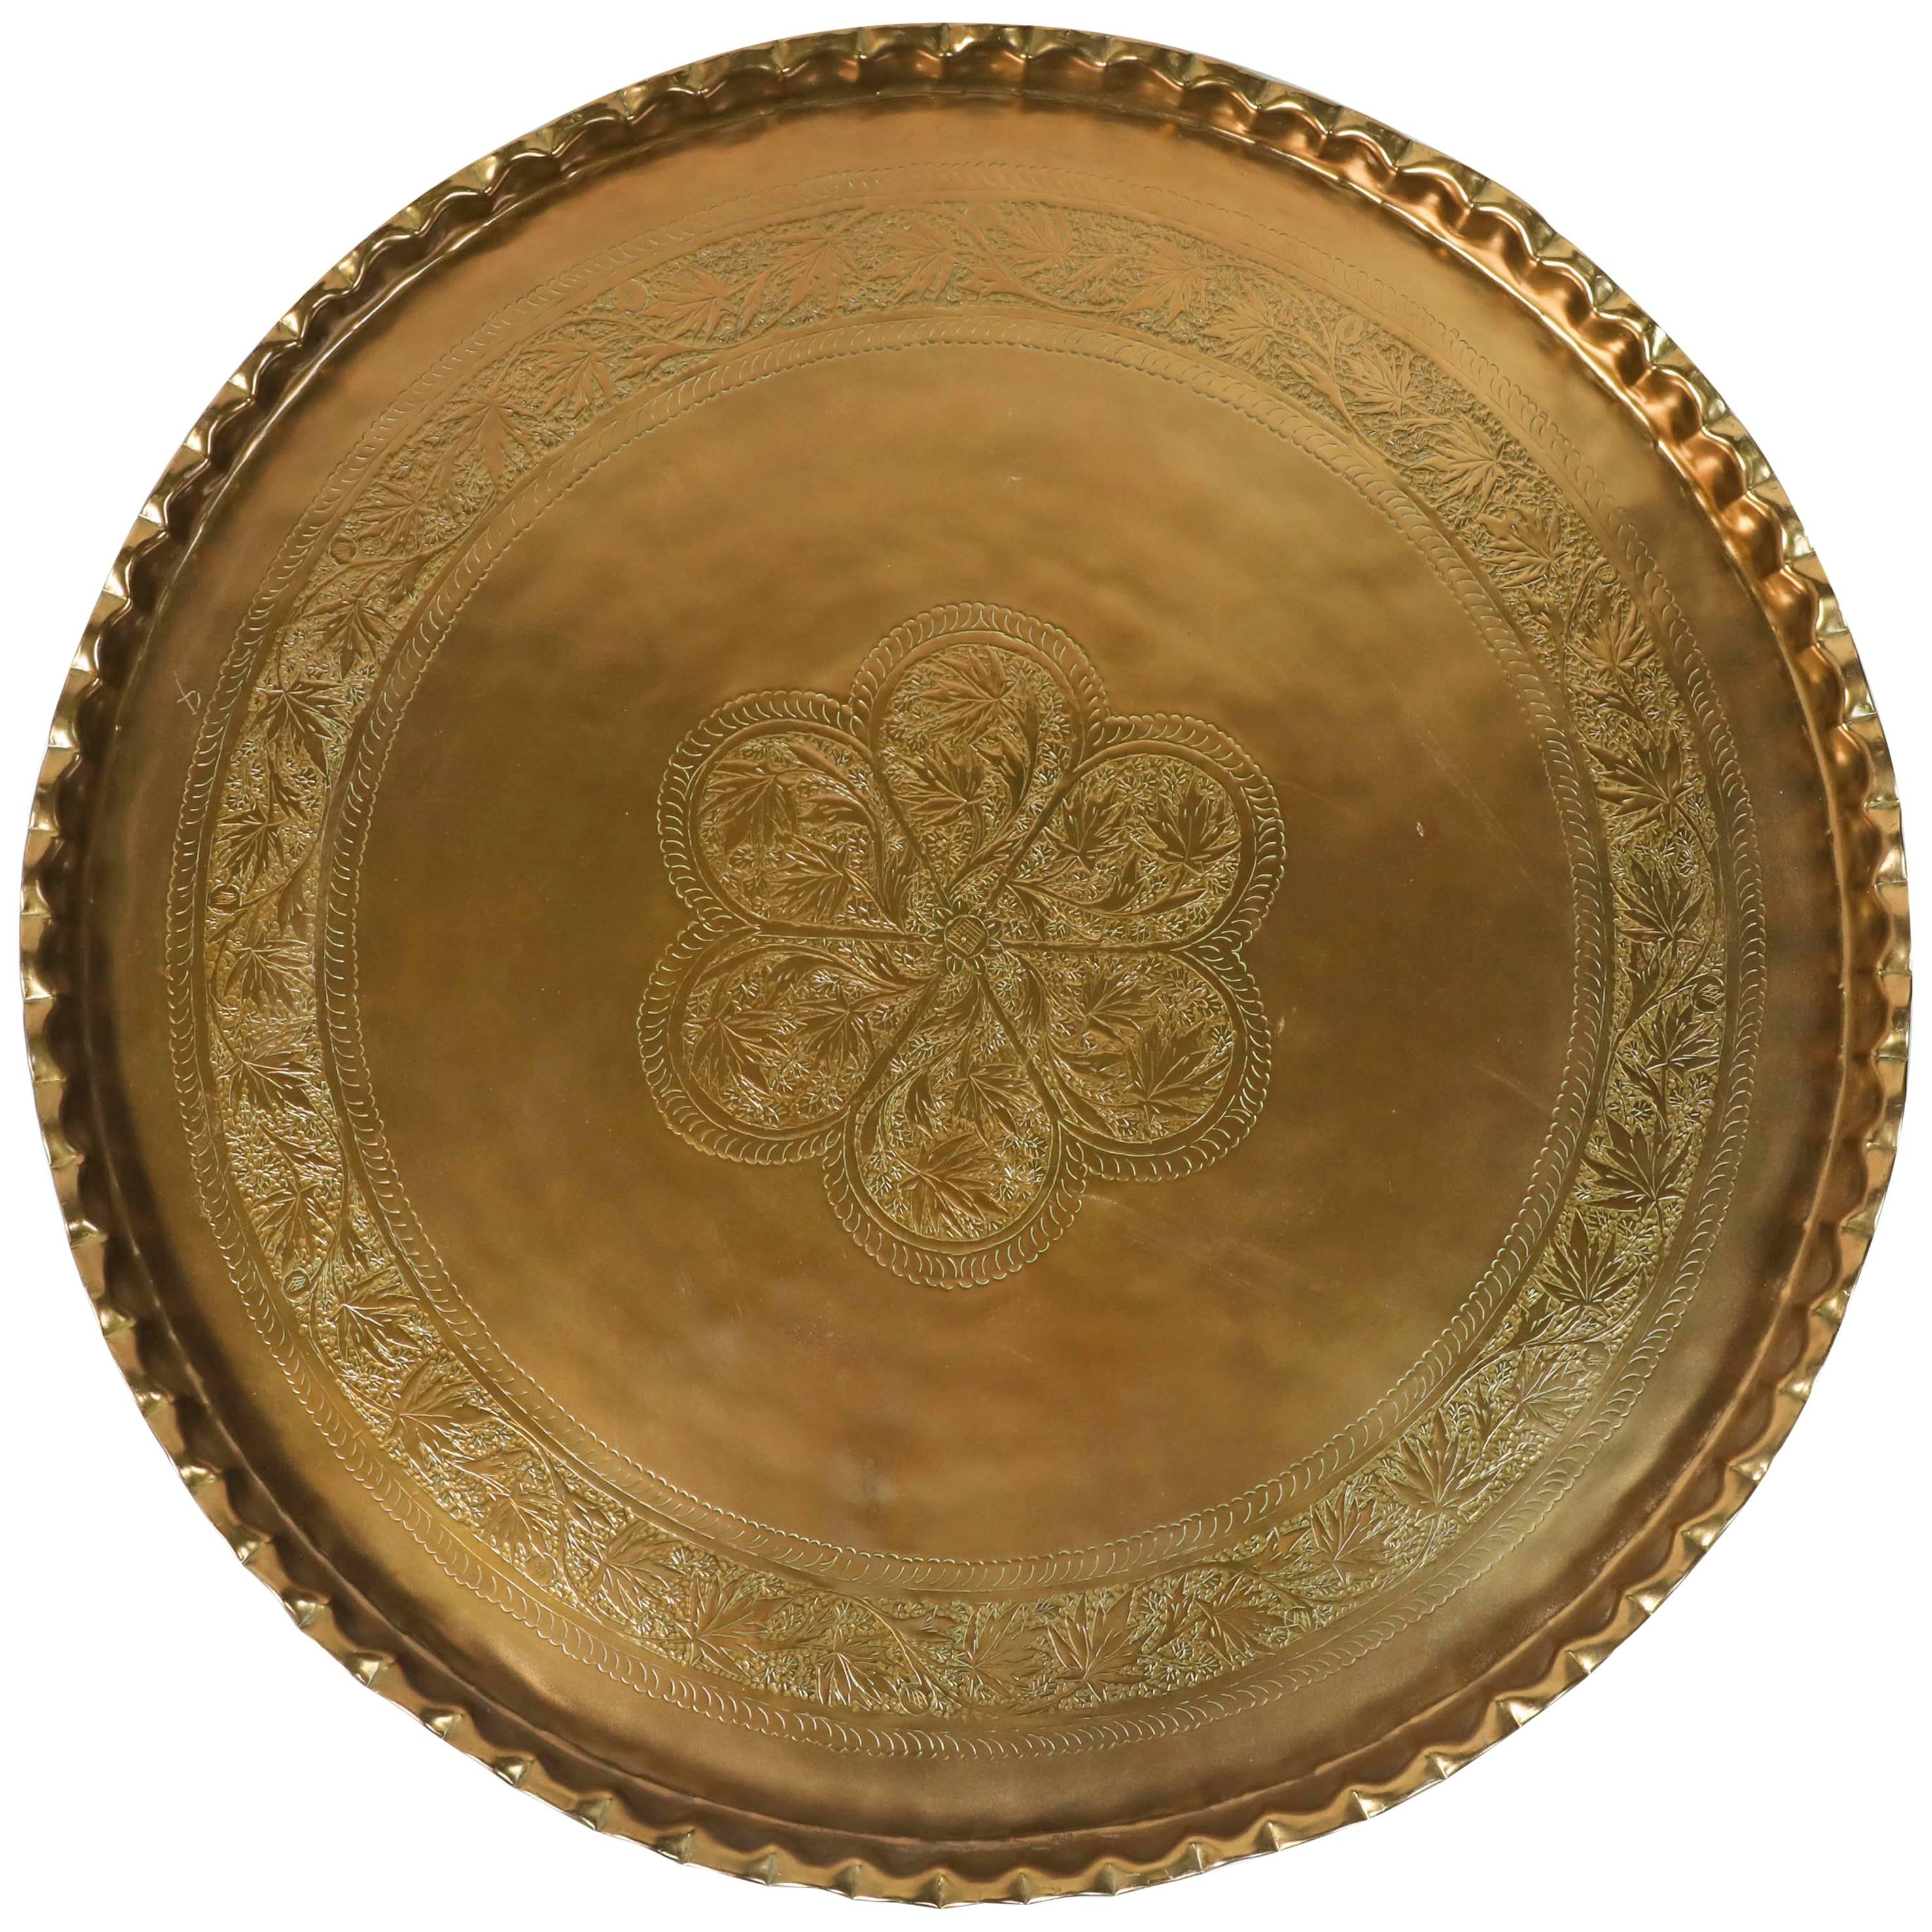 Large Moorish Middle Eastern Hanging Brass Tray Platter 36 Inches Diameter